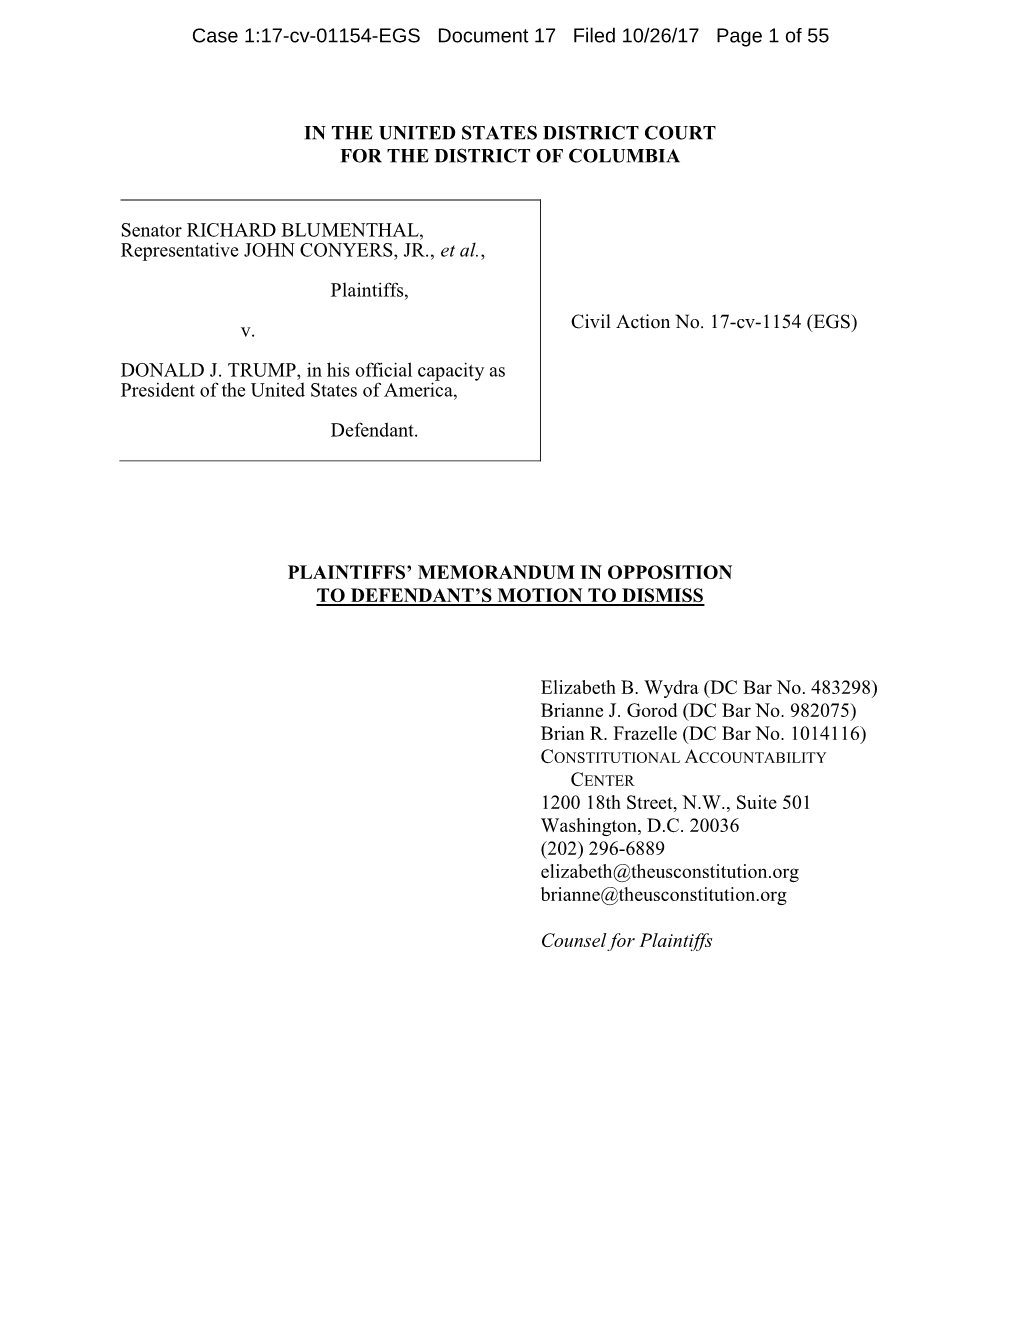 Our Brief Opposing the President's Motion to Dismiss